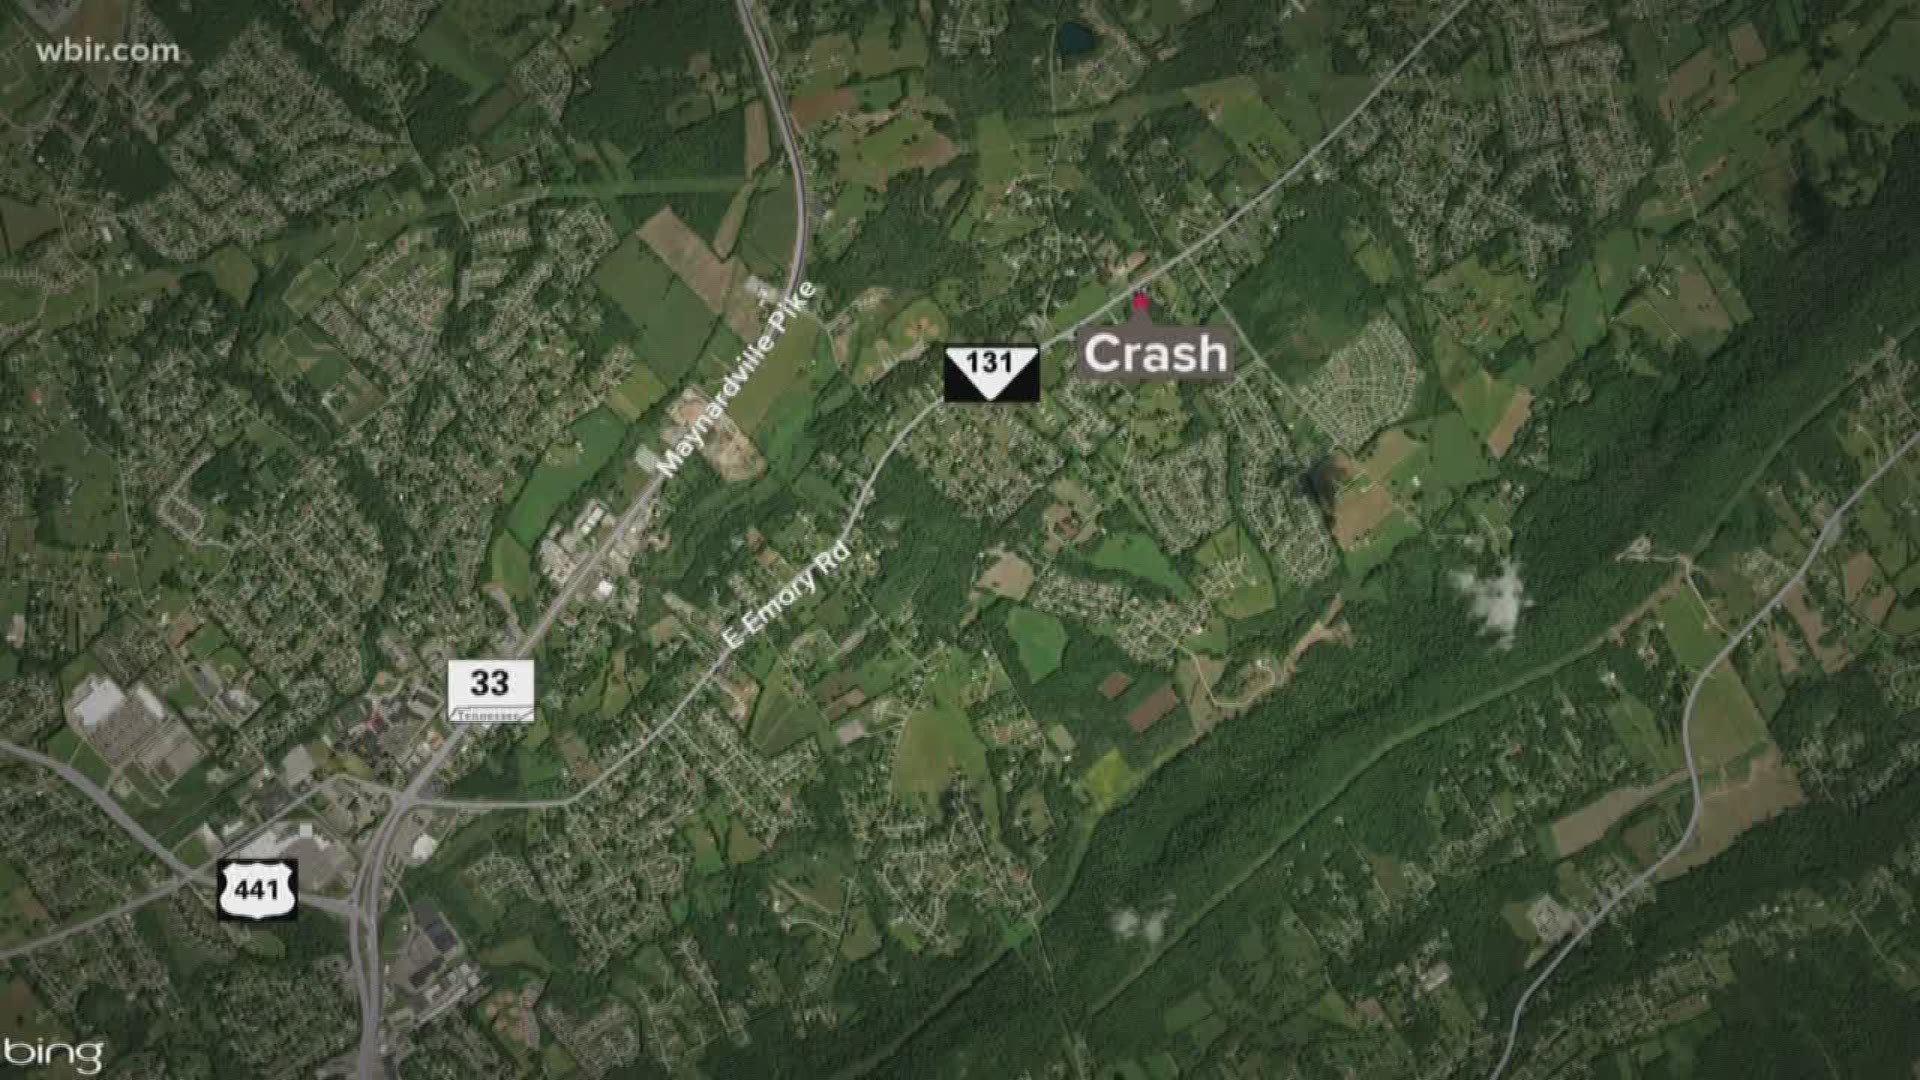 Two people are dead after a car crash early this morning in Knox County. The Sheriff's Office says it happened on East Emory Road at Bell Road near Maynardville Pike.